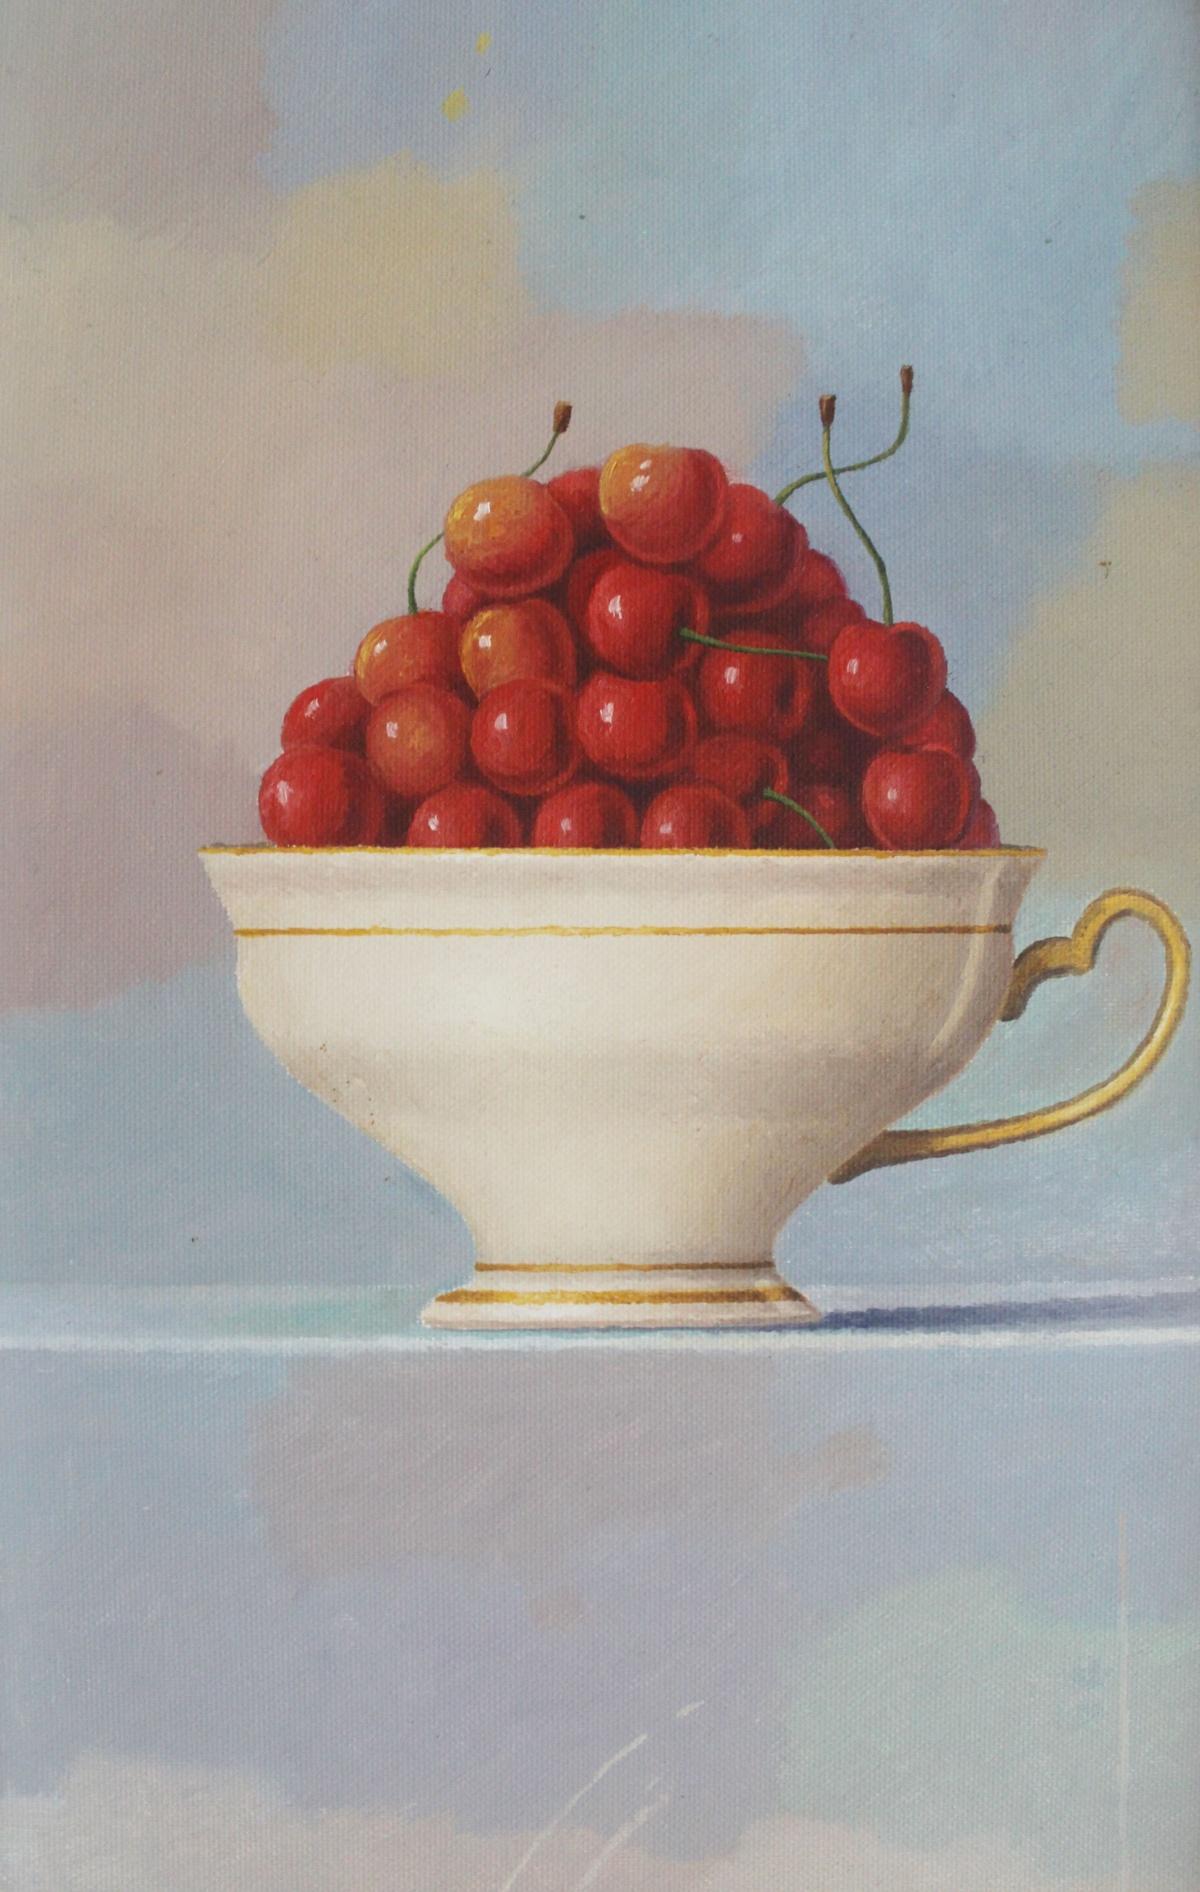 Cherries - XXI Century, Contemporary Still life Oil Painting, Realistic - Gray Still-Life Painting by Zbigniew Wozniak